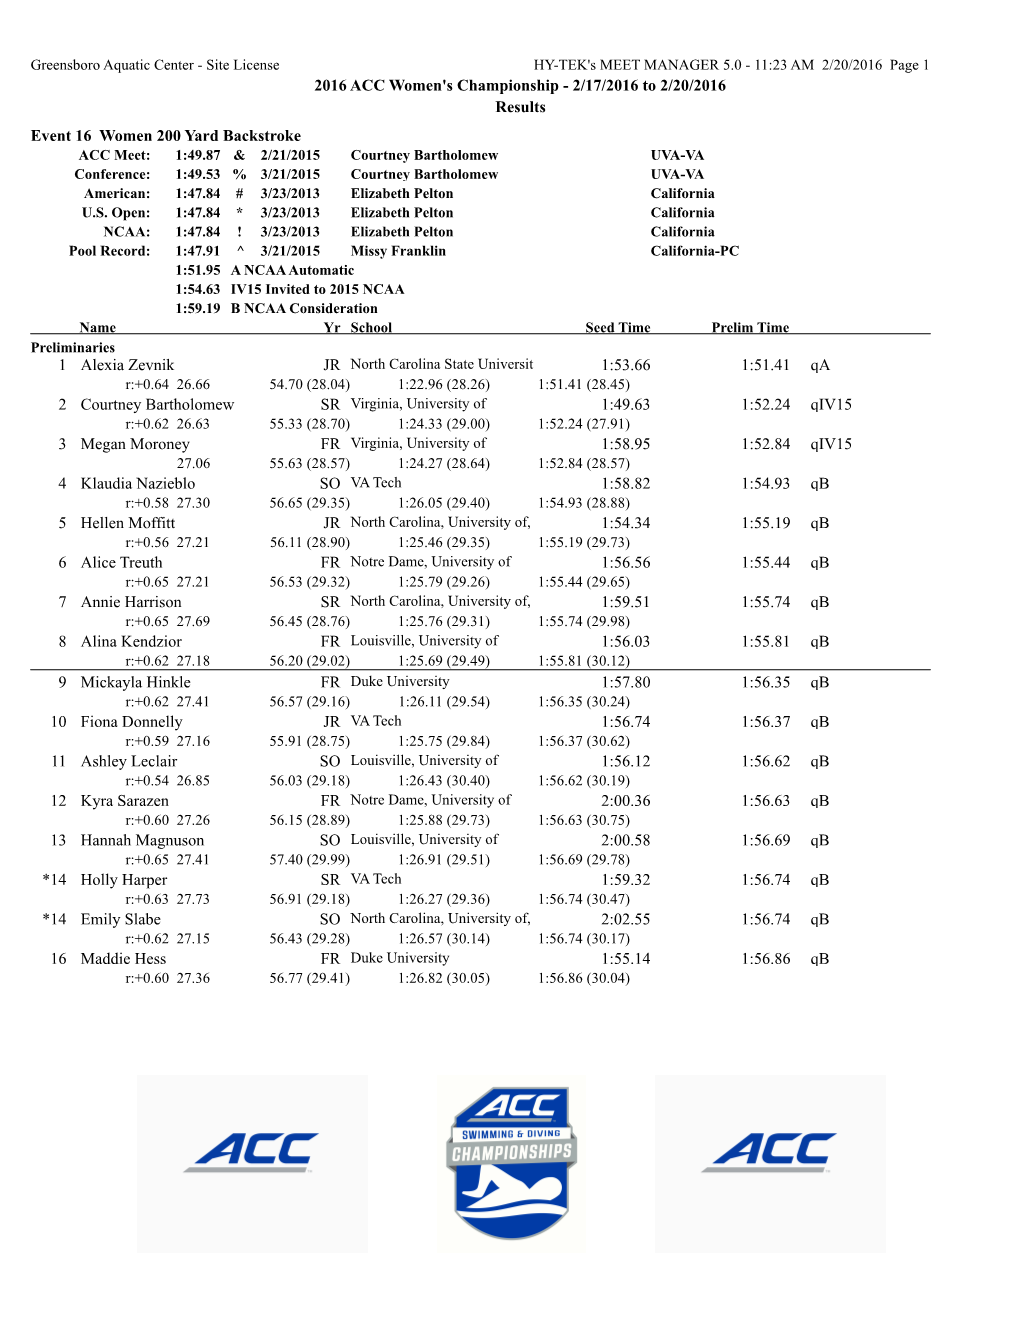 2016 ACC Women's Championship - 2/17/2016 to 2/20/2016 Results